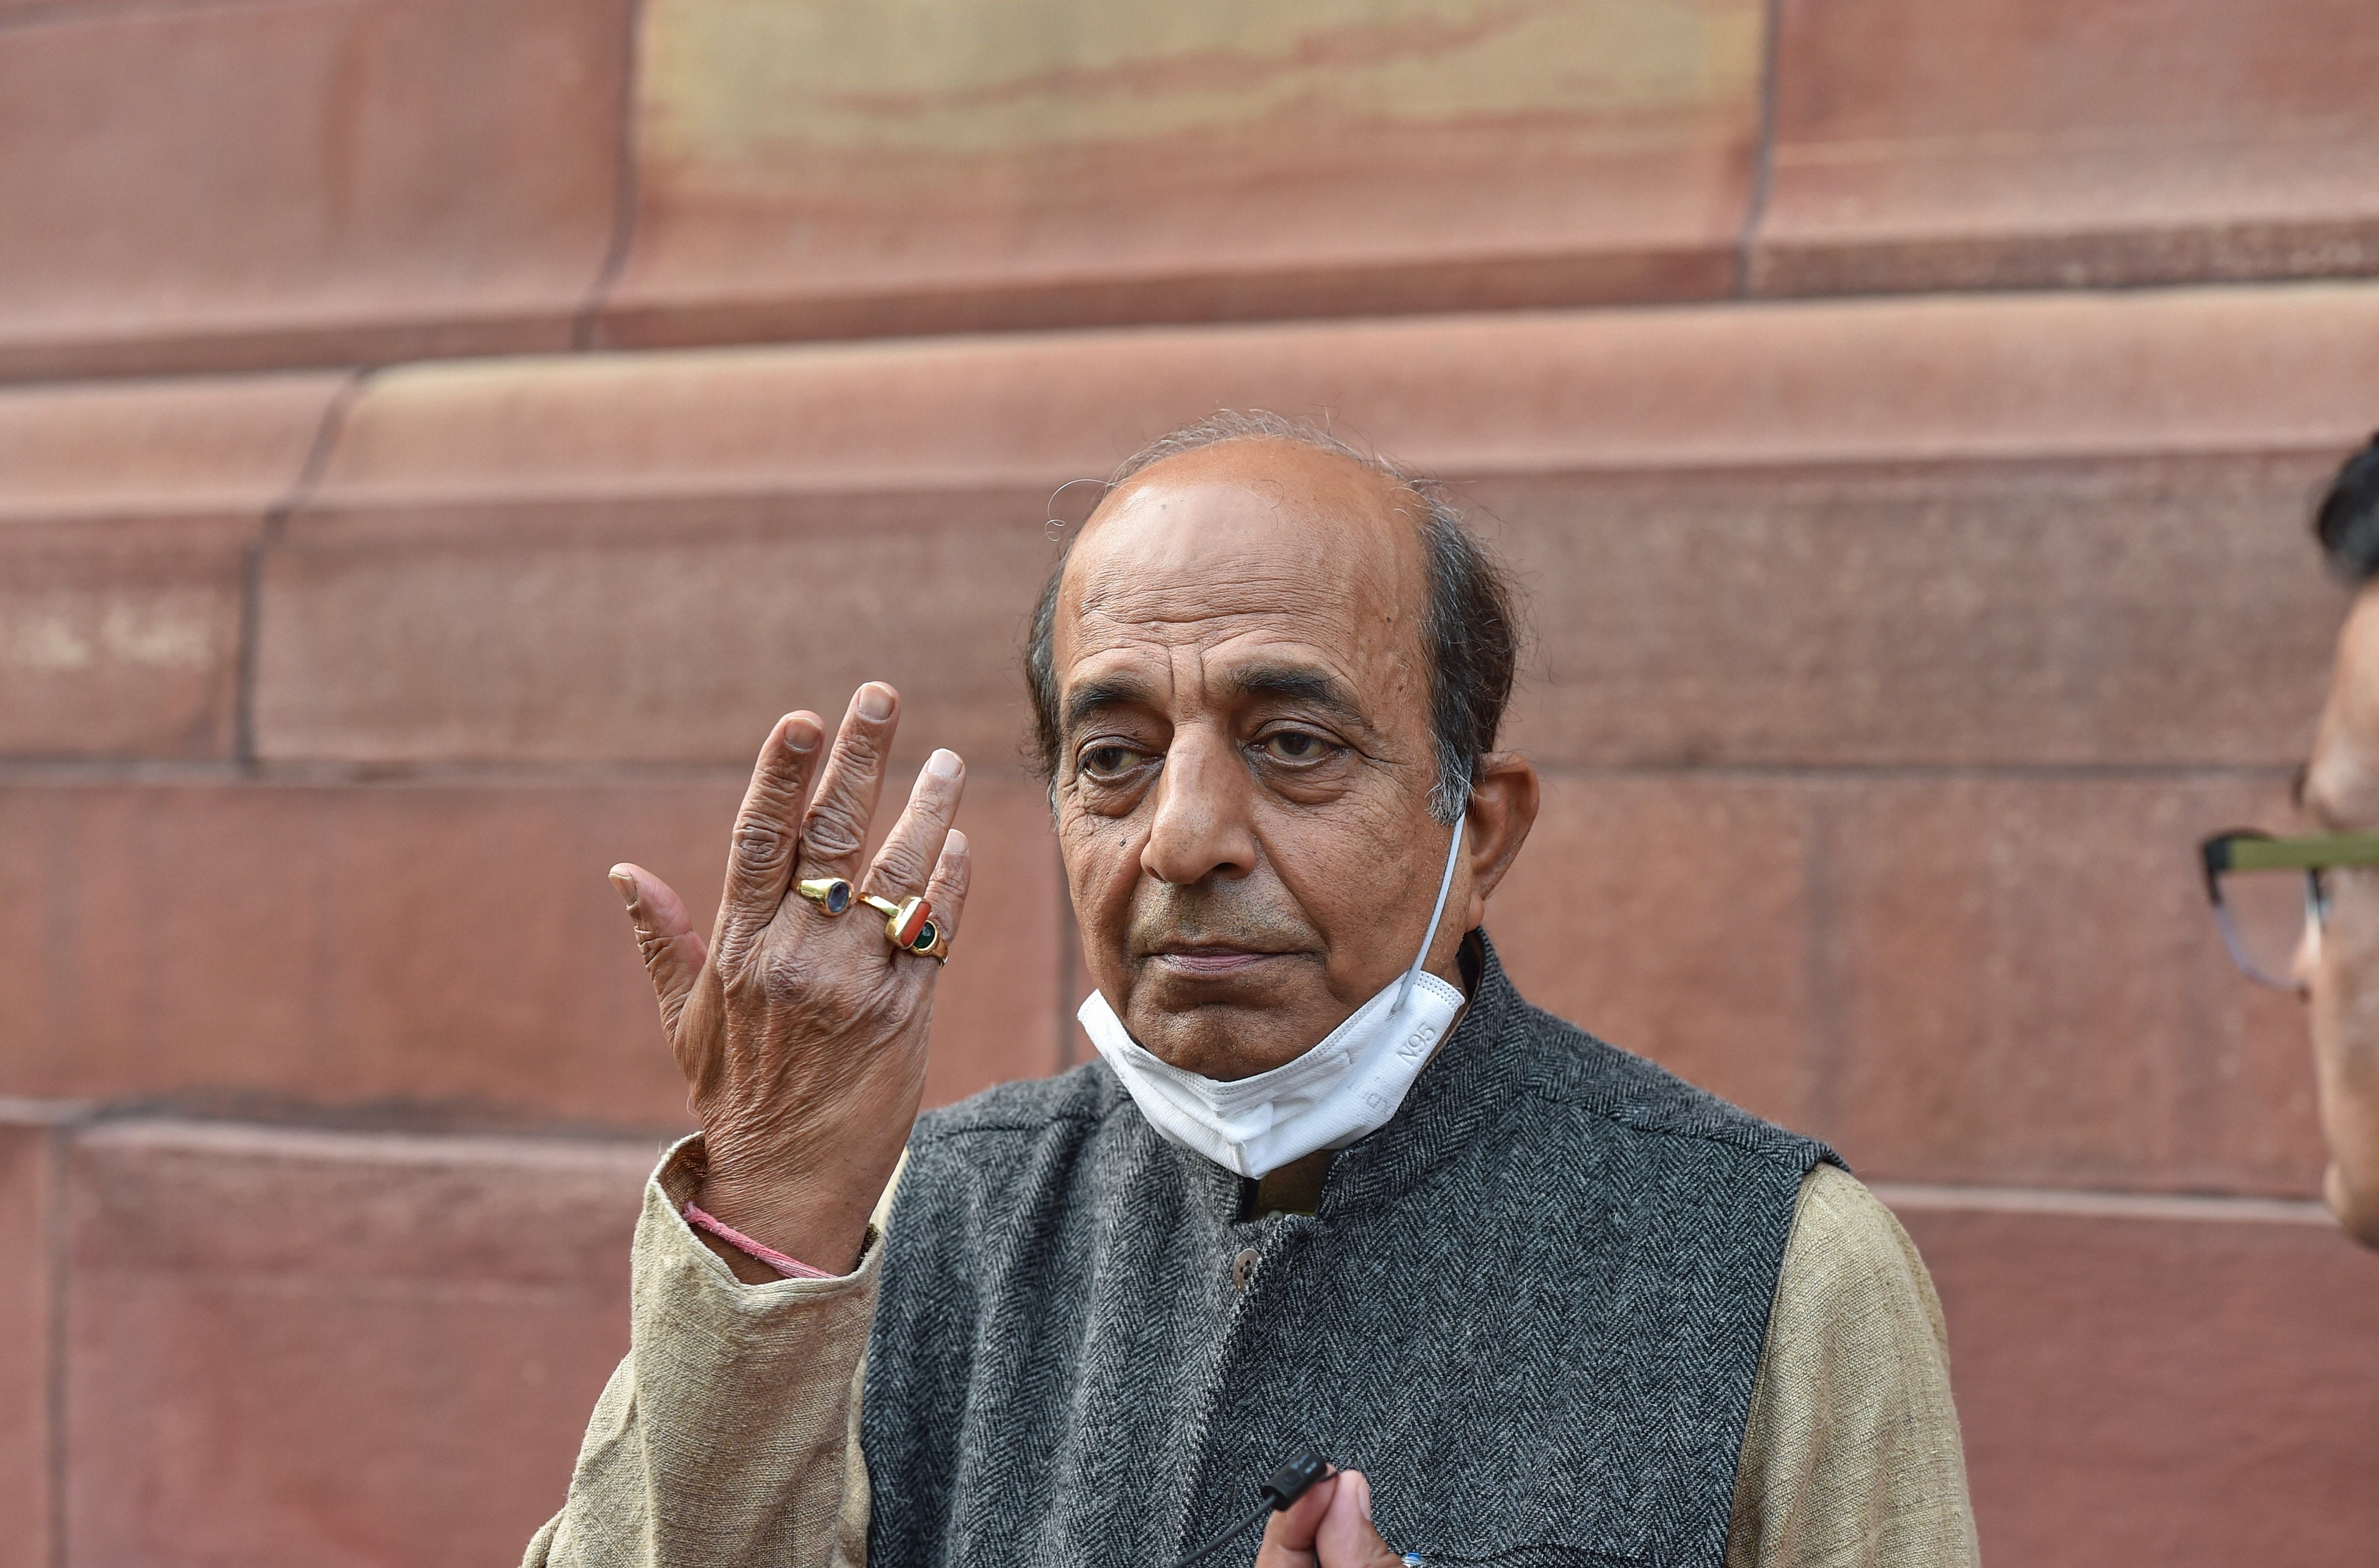 TMC MP Dinesh Trivedi at Parliament during the ongoing Budget Session, in New Delhi, Friday, Feb. 12, 2021. Trivedi announced his resignation from the Rajya Sabha on Friday, saying he feels suffocated in the House as he is unable to do anything for the violence going on in his state, West Bengal. Credit: PTI Photo